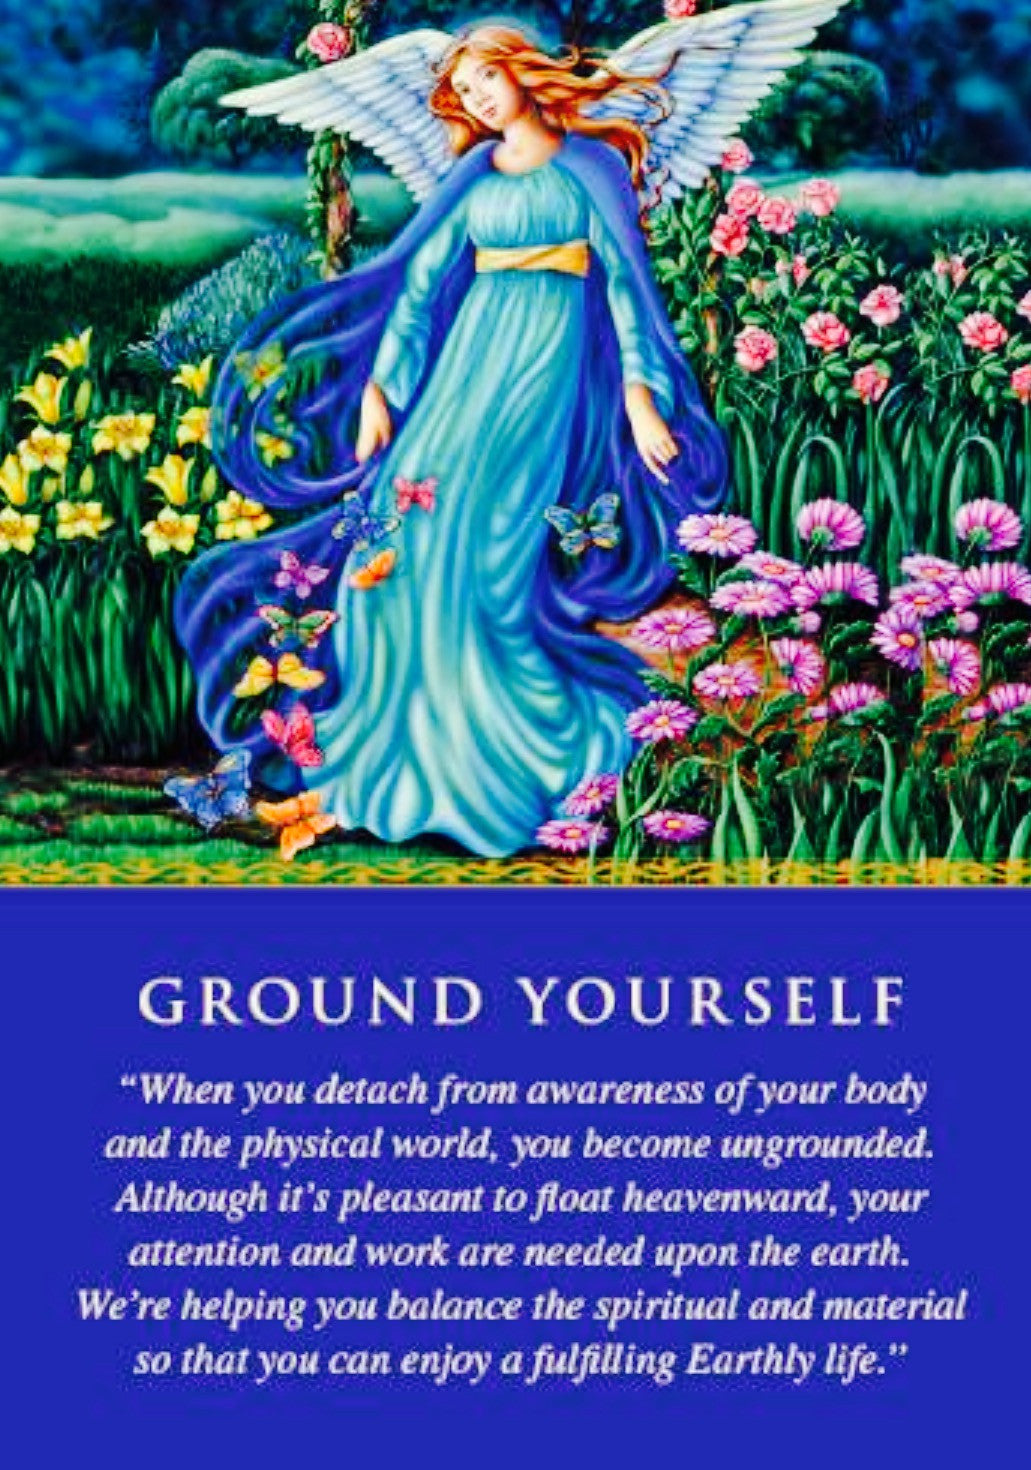 Take time to ground yourself today.